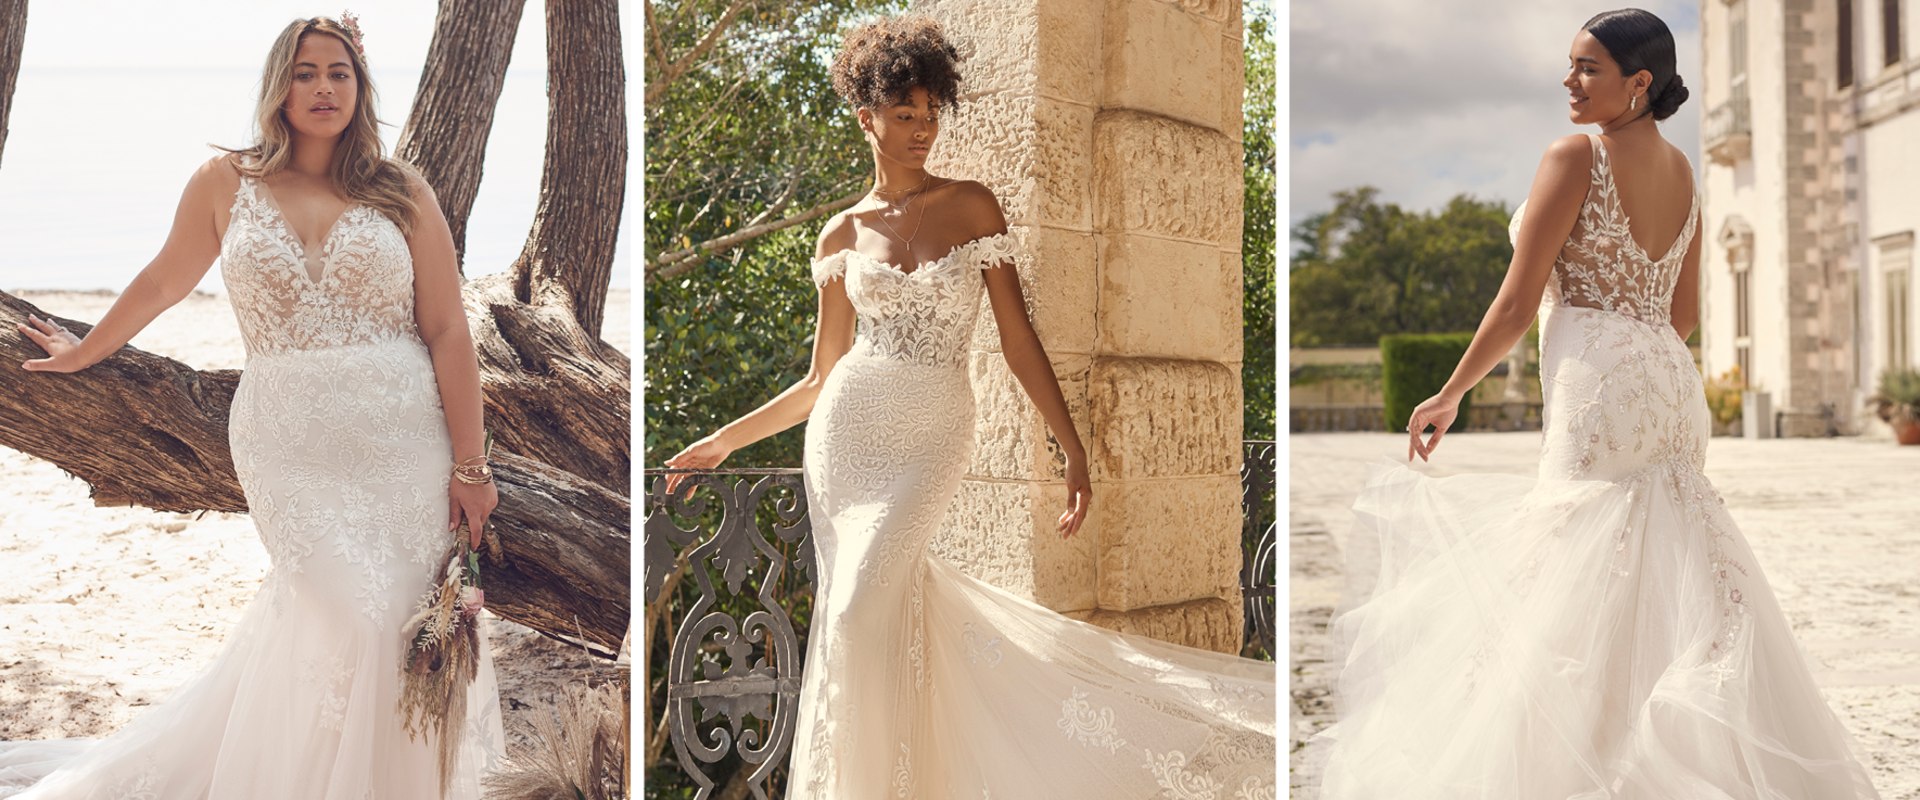 Mermaid Wedding Dresses: A Beautiful Choice for Your Big Day